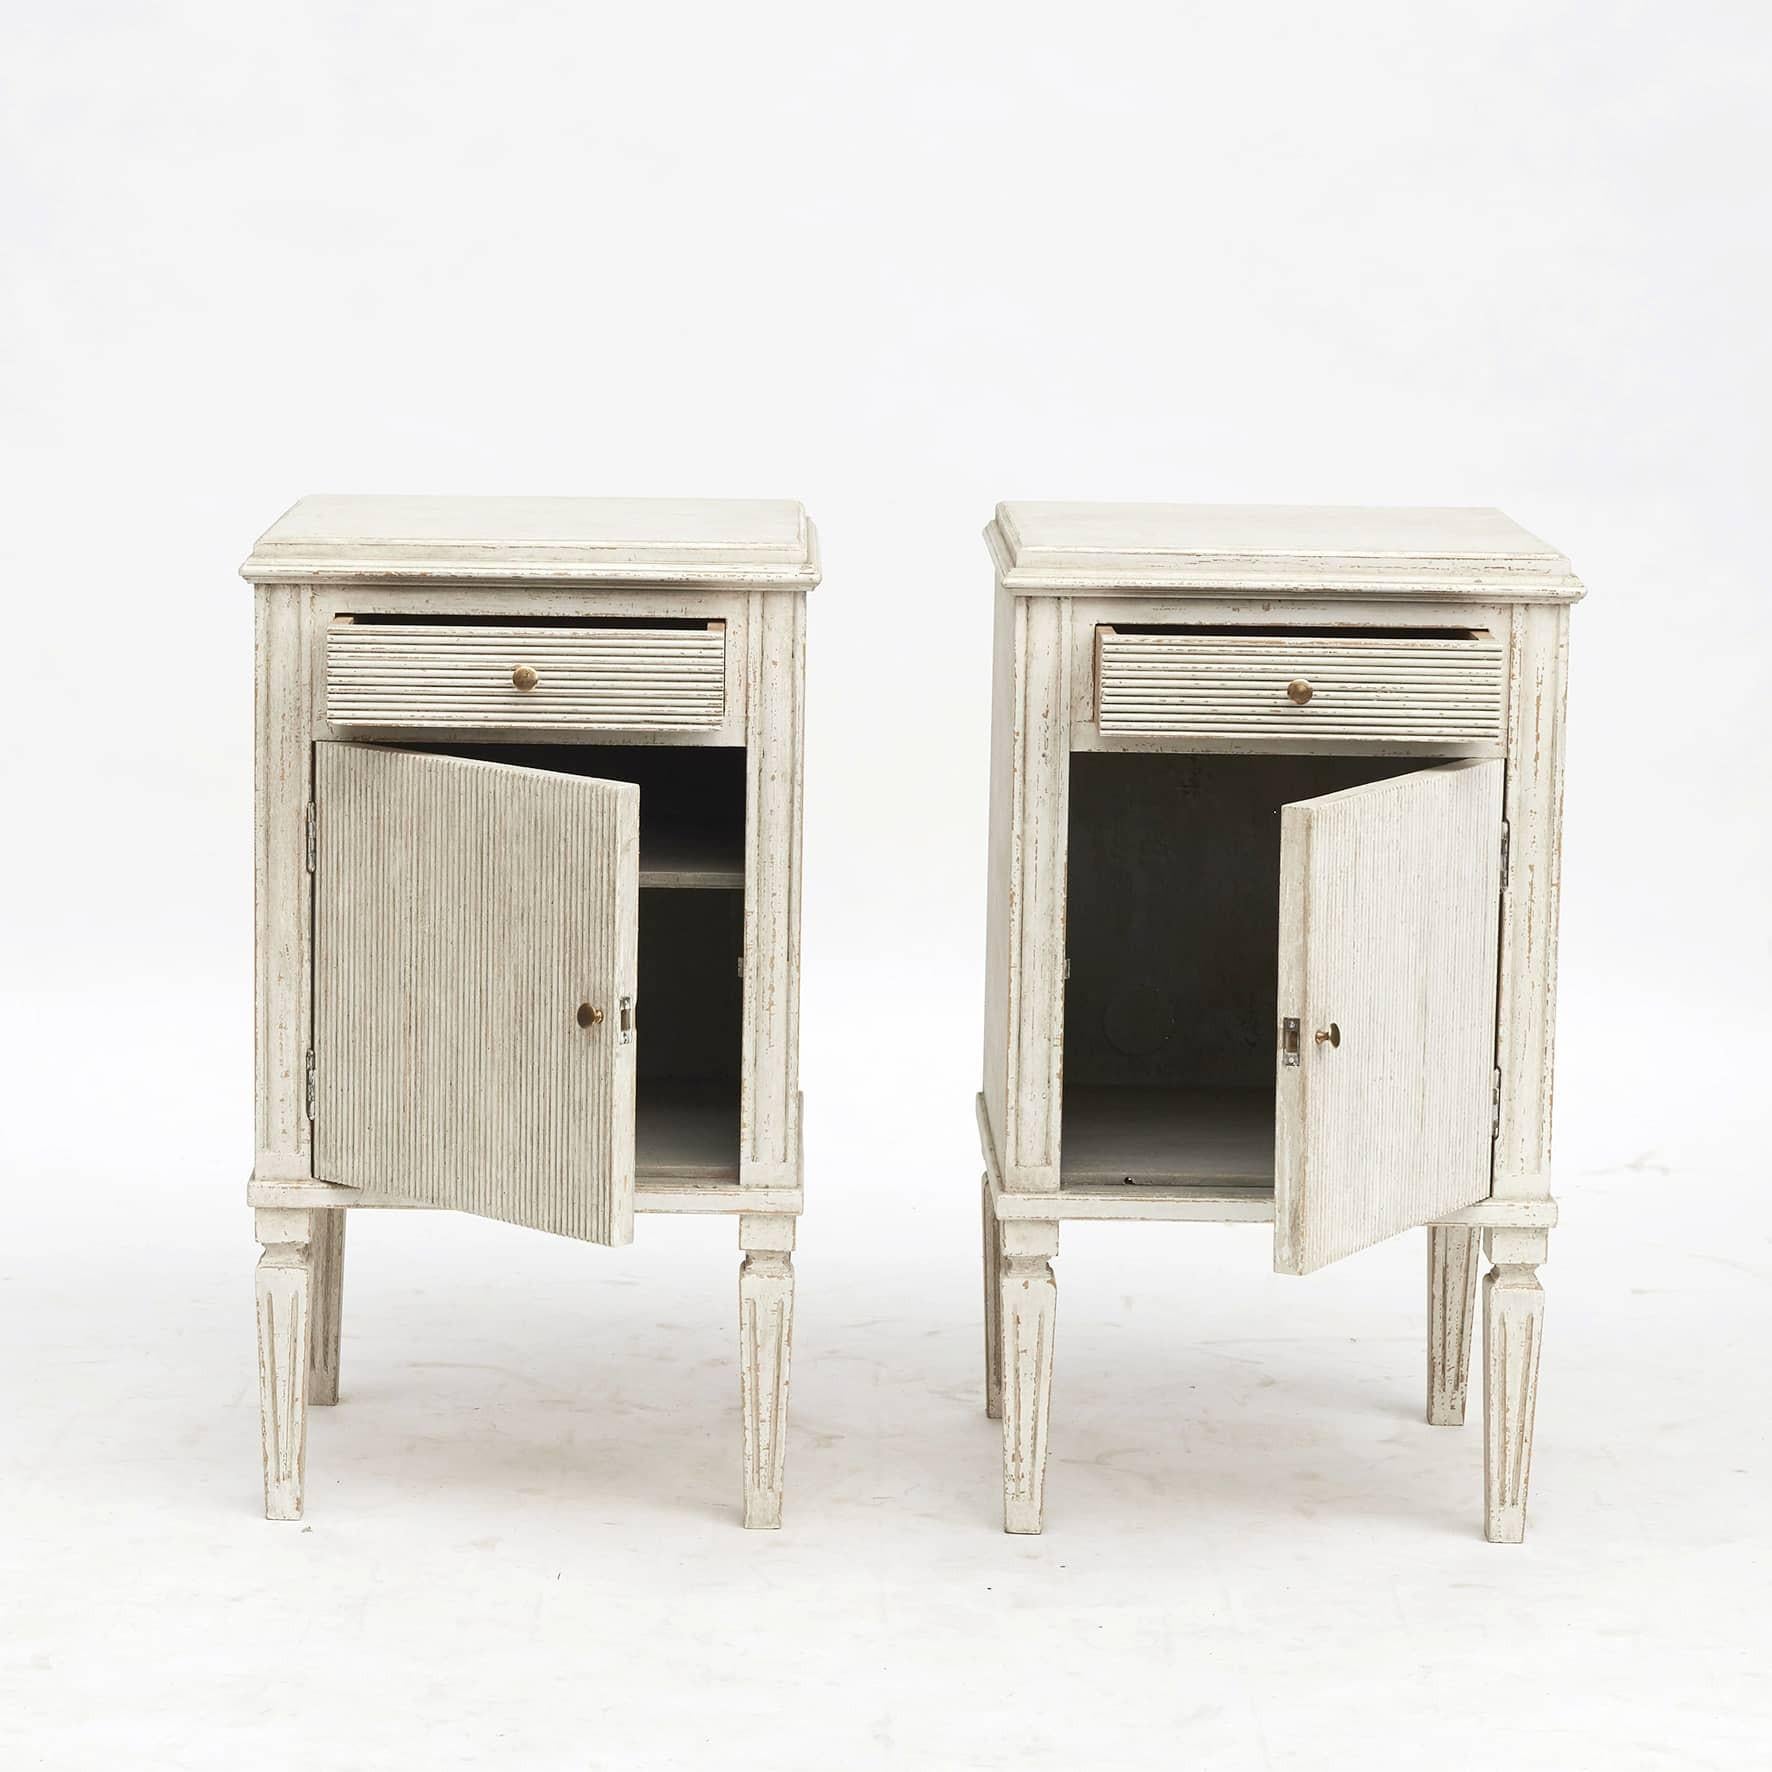 Pair of Gustavian style nightstands or bedside cabinets.
Fluted cupboard doors and drawers with brass knobs. Fluted tapered legs.

Sweden, mid-19th century.